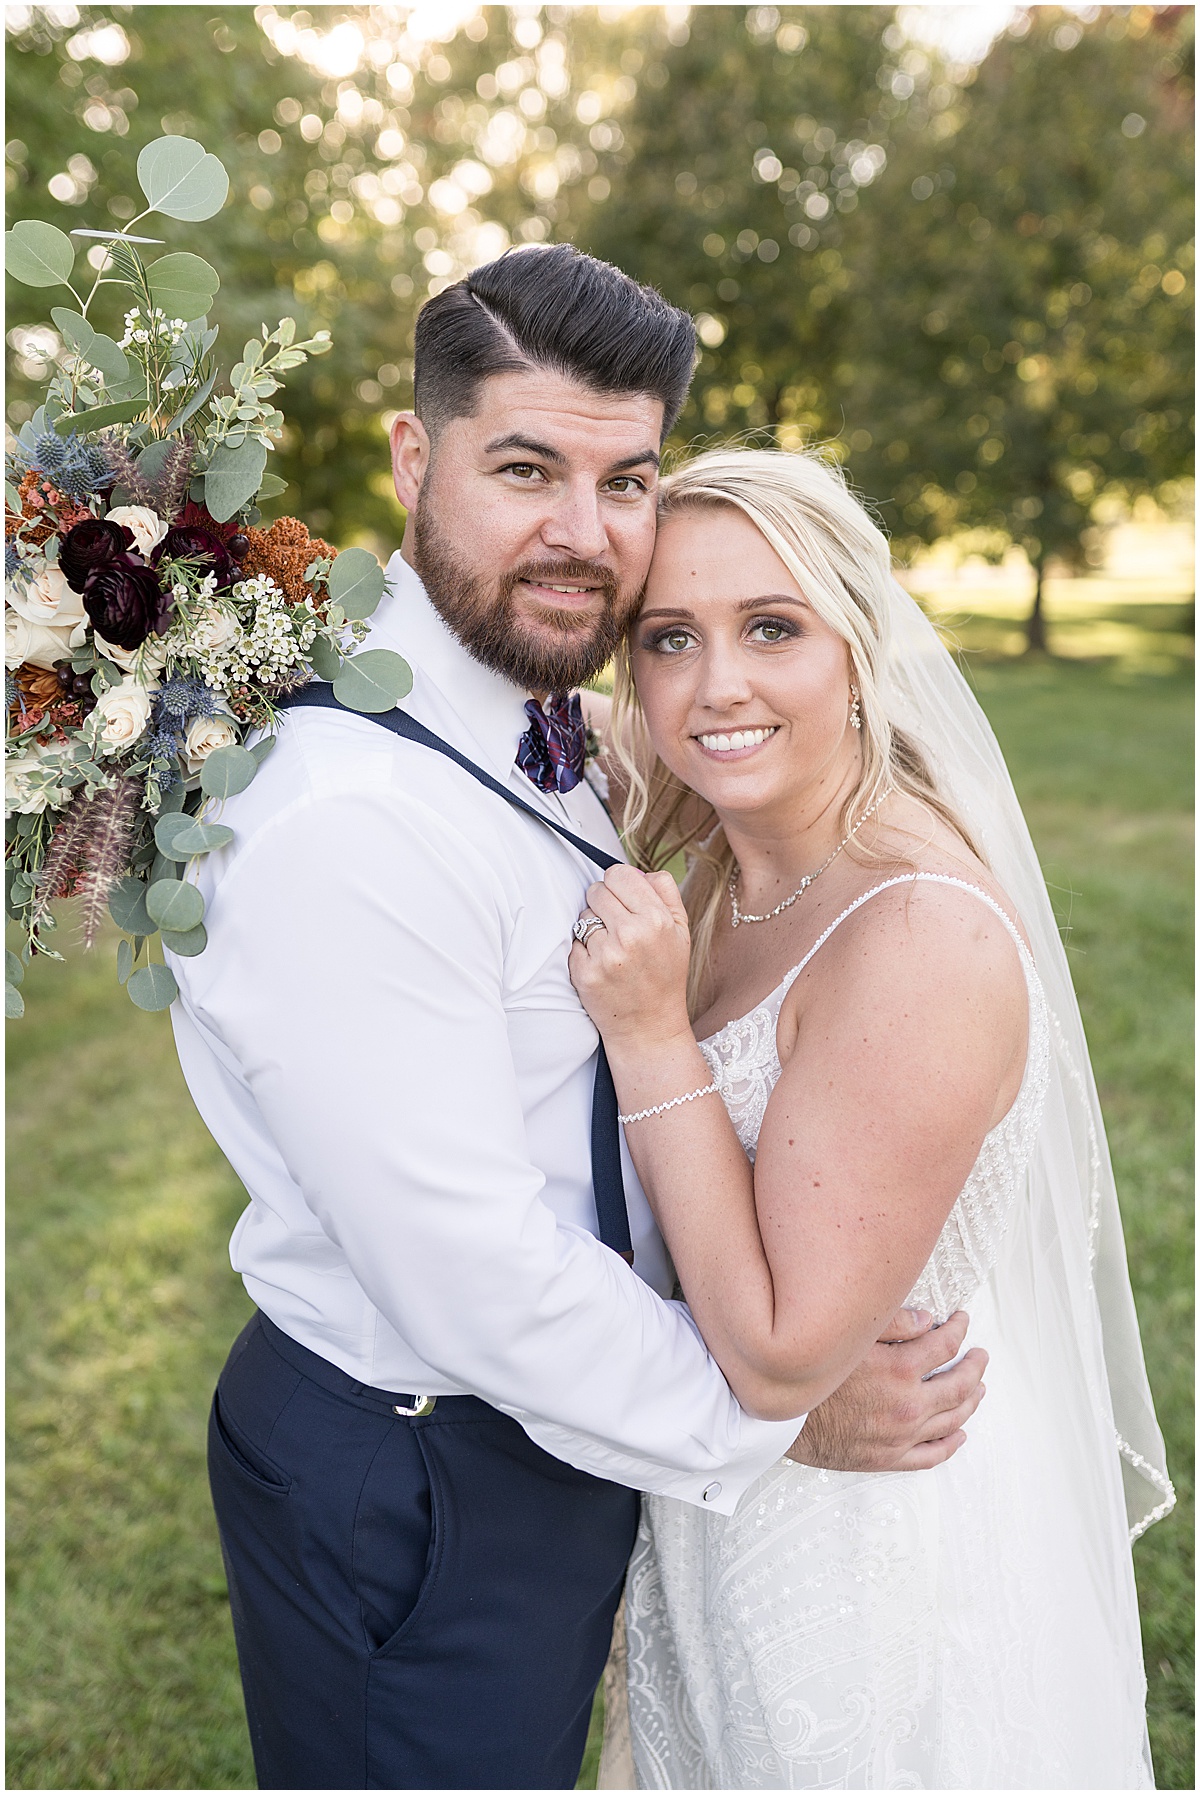 Just married photo after Finley Creek Vineyards wedding in Zionsville, Indiana